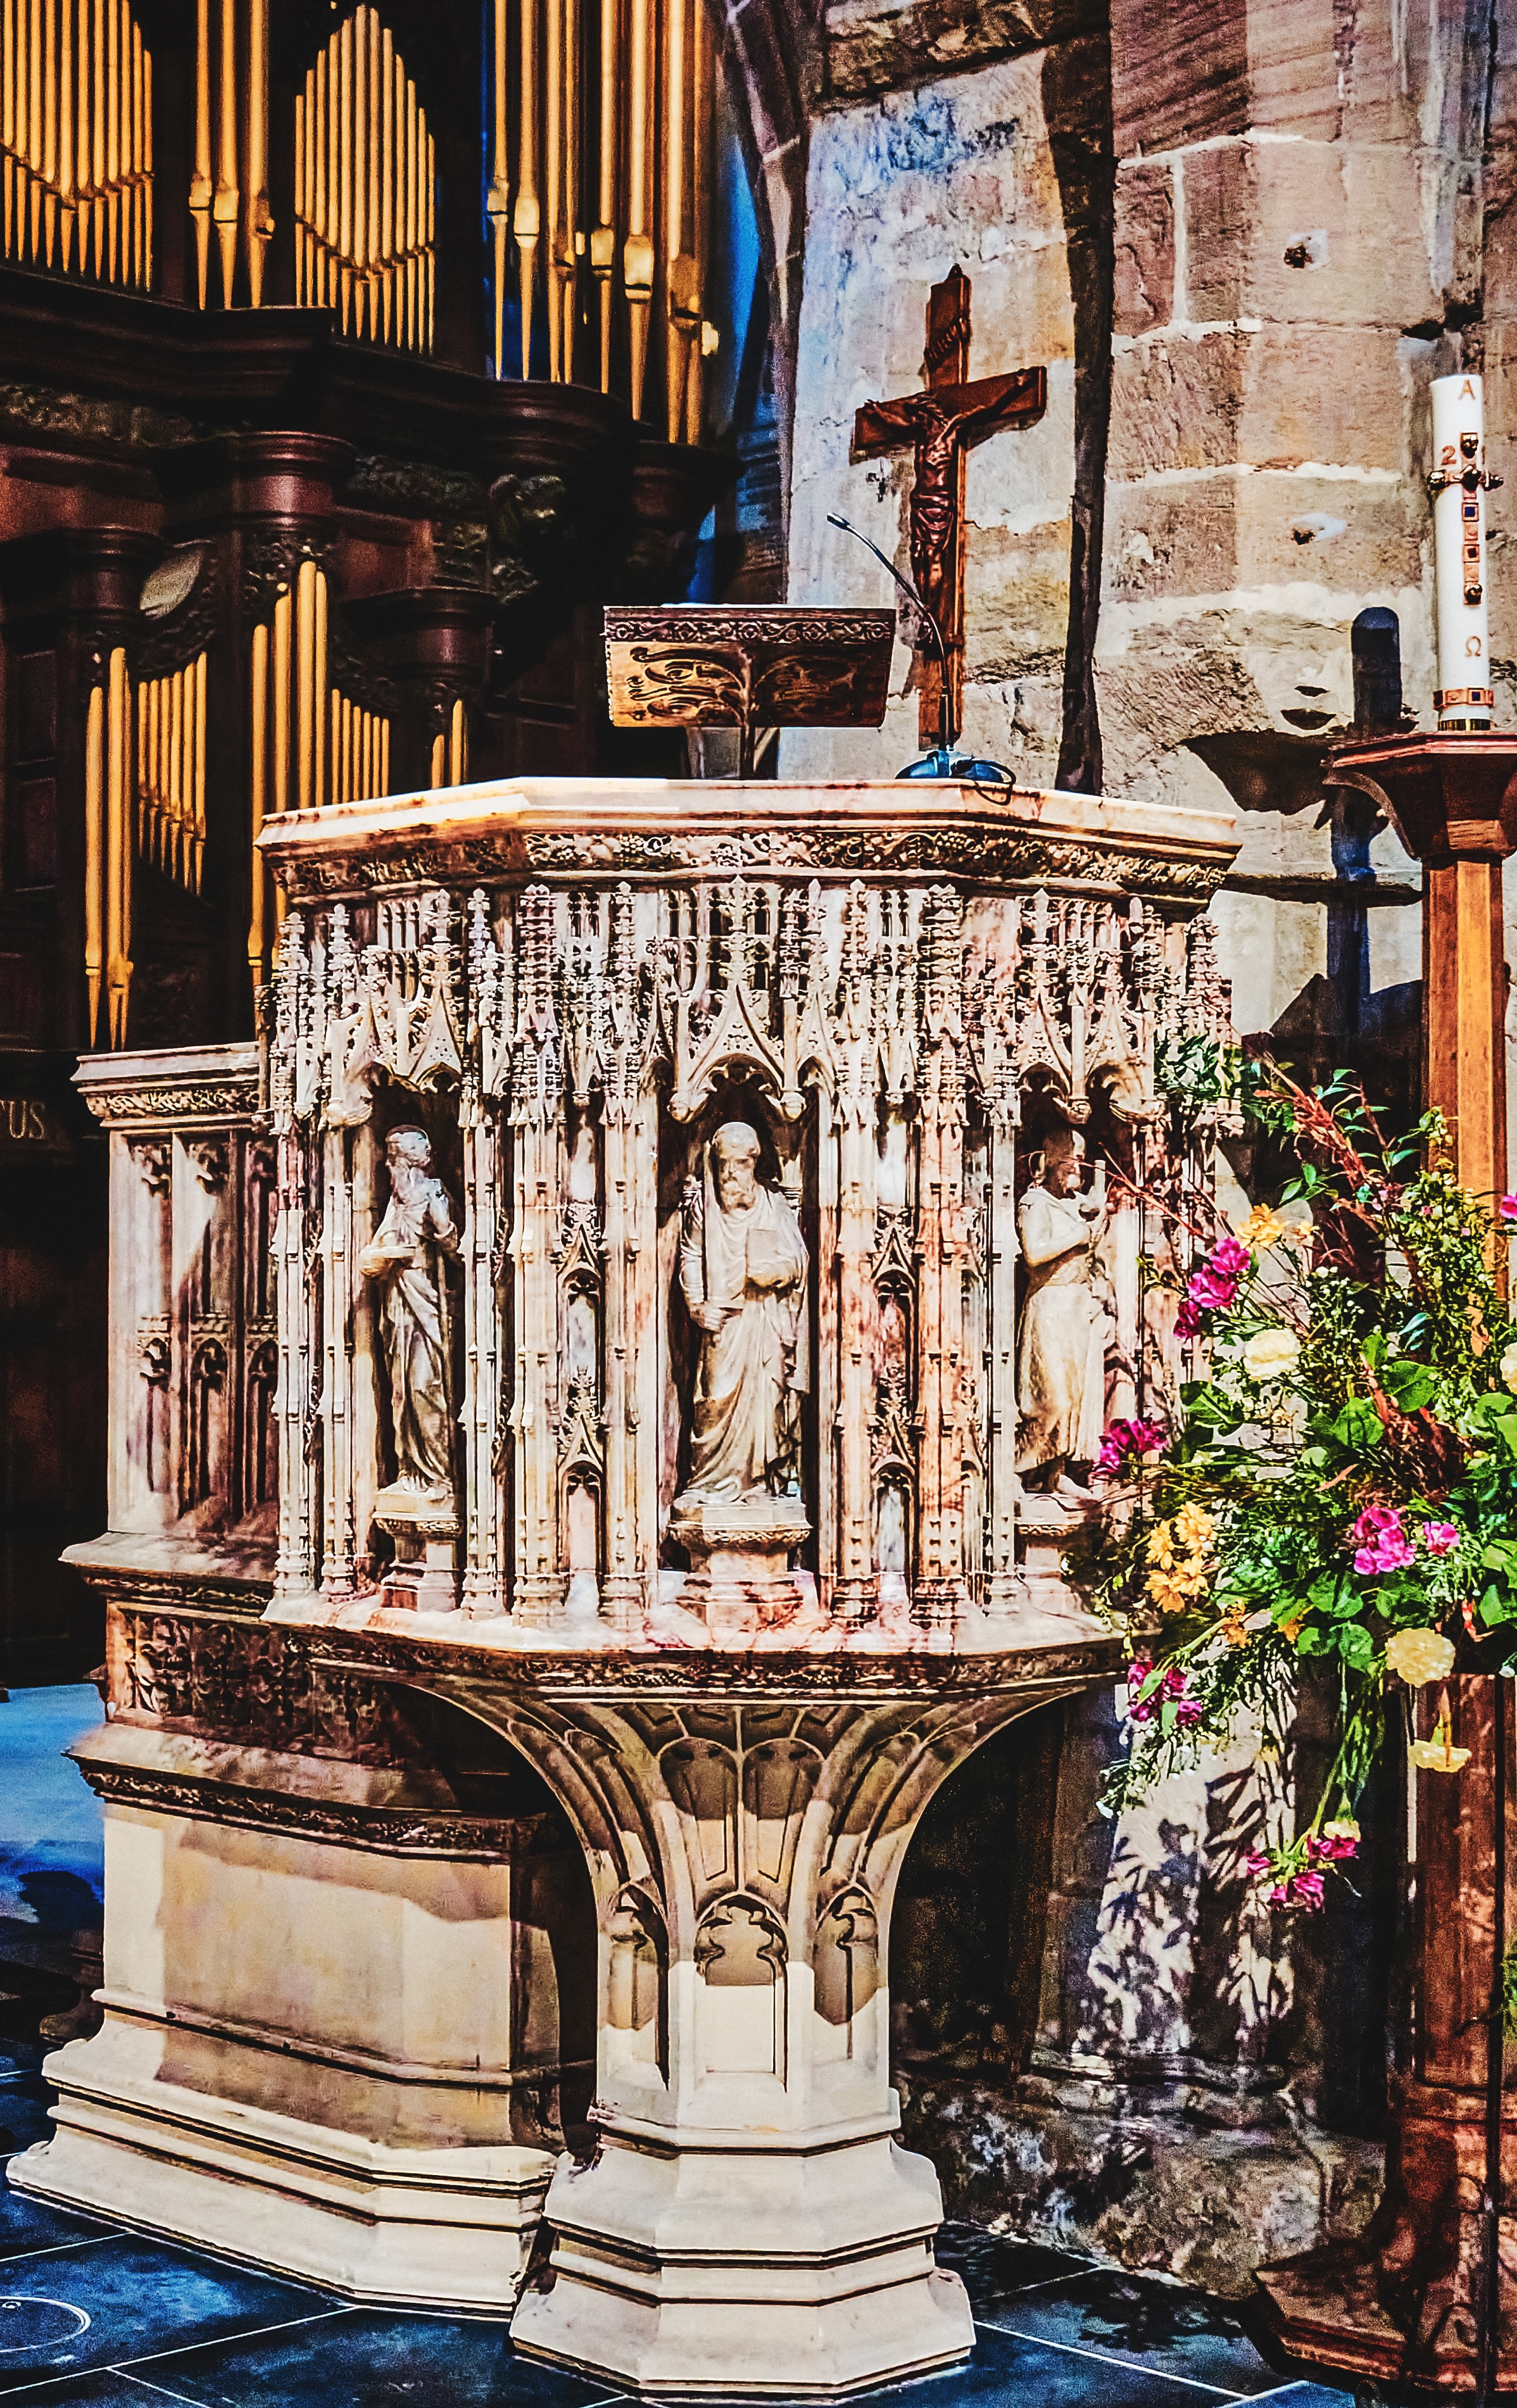 An exquisitely sculpted marble dais in The Cathedral of St. Nicholas (Sep., 2021).